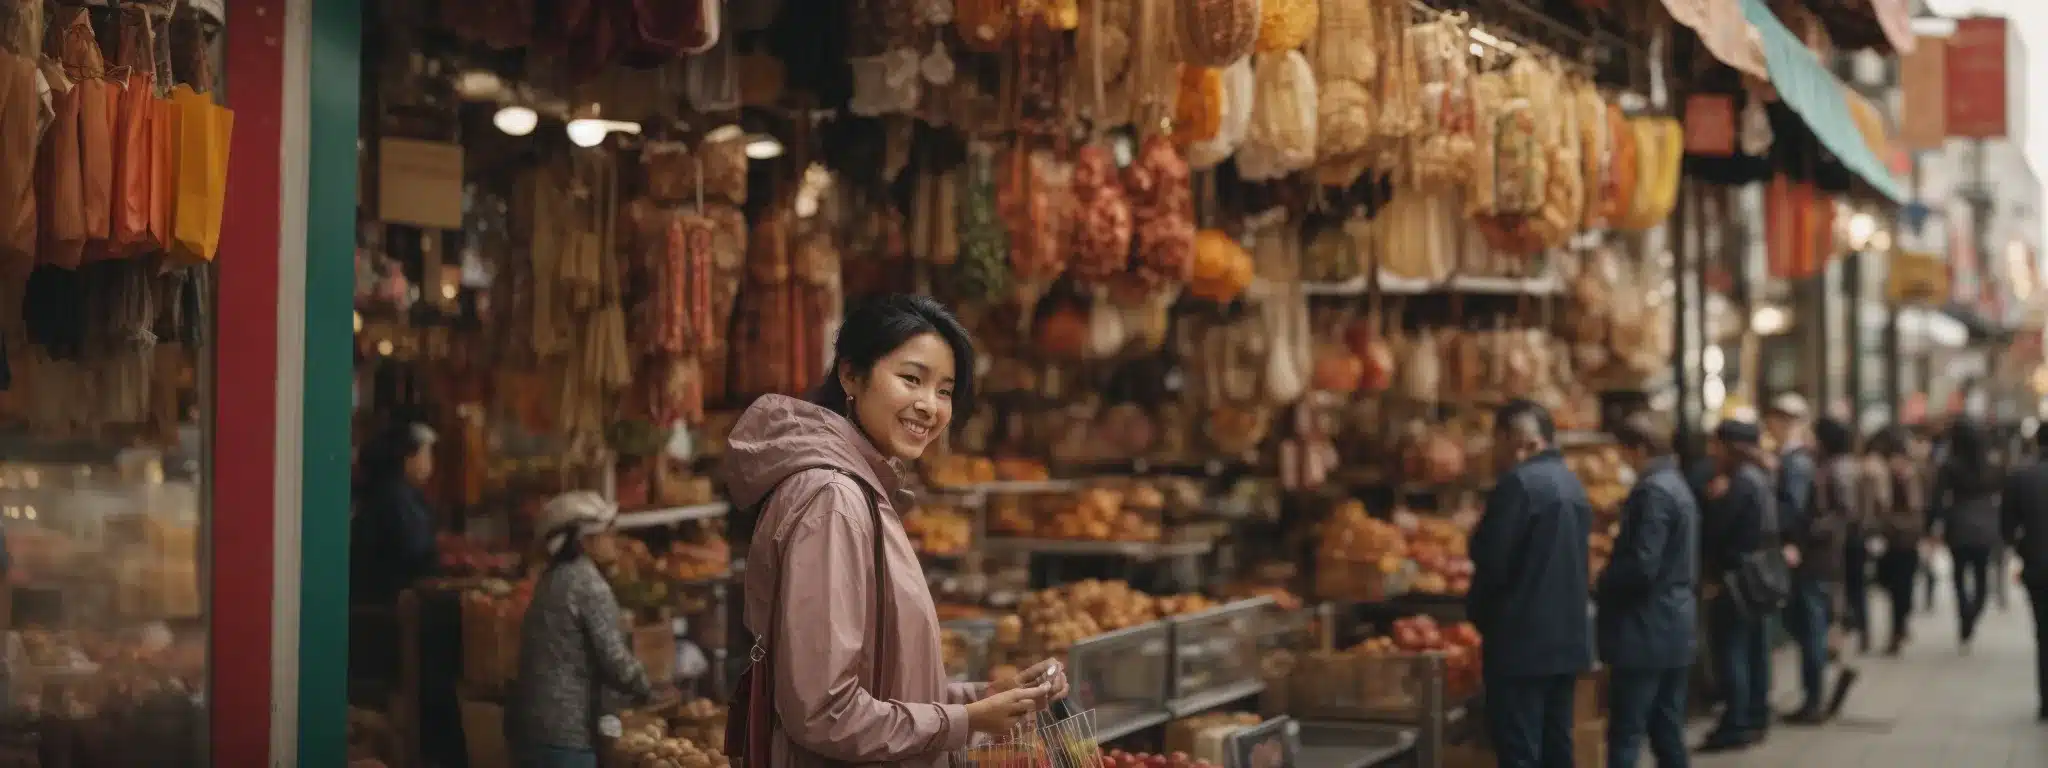 A Customer Joyfully Shopping In A Vibrant, Bustling Market Filled With Various Brand Storefronts.